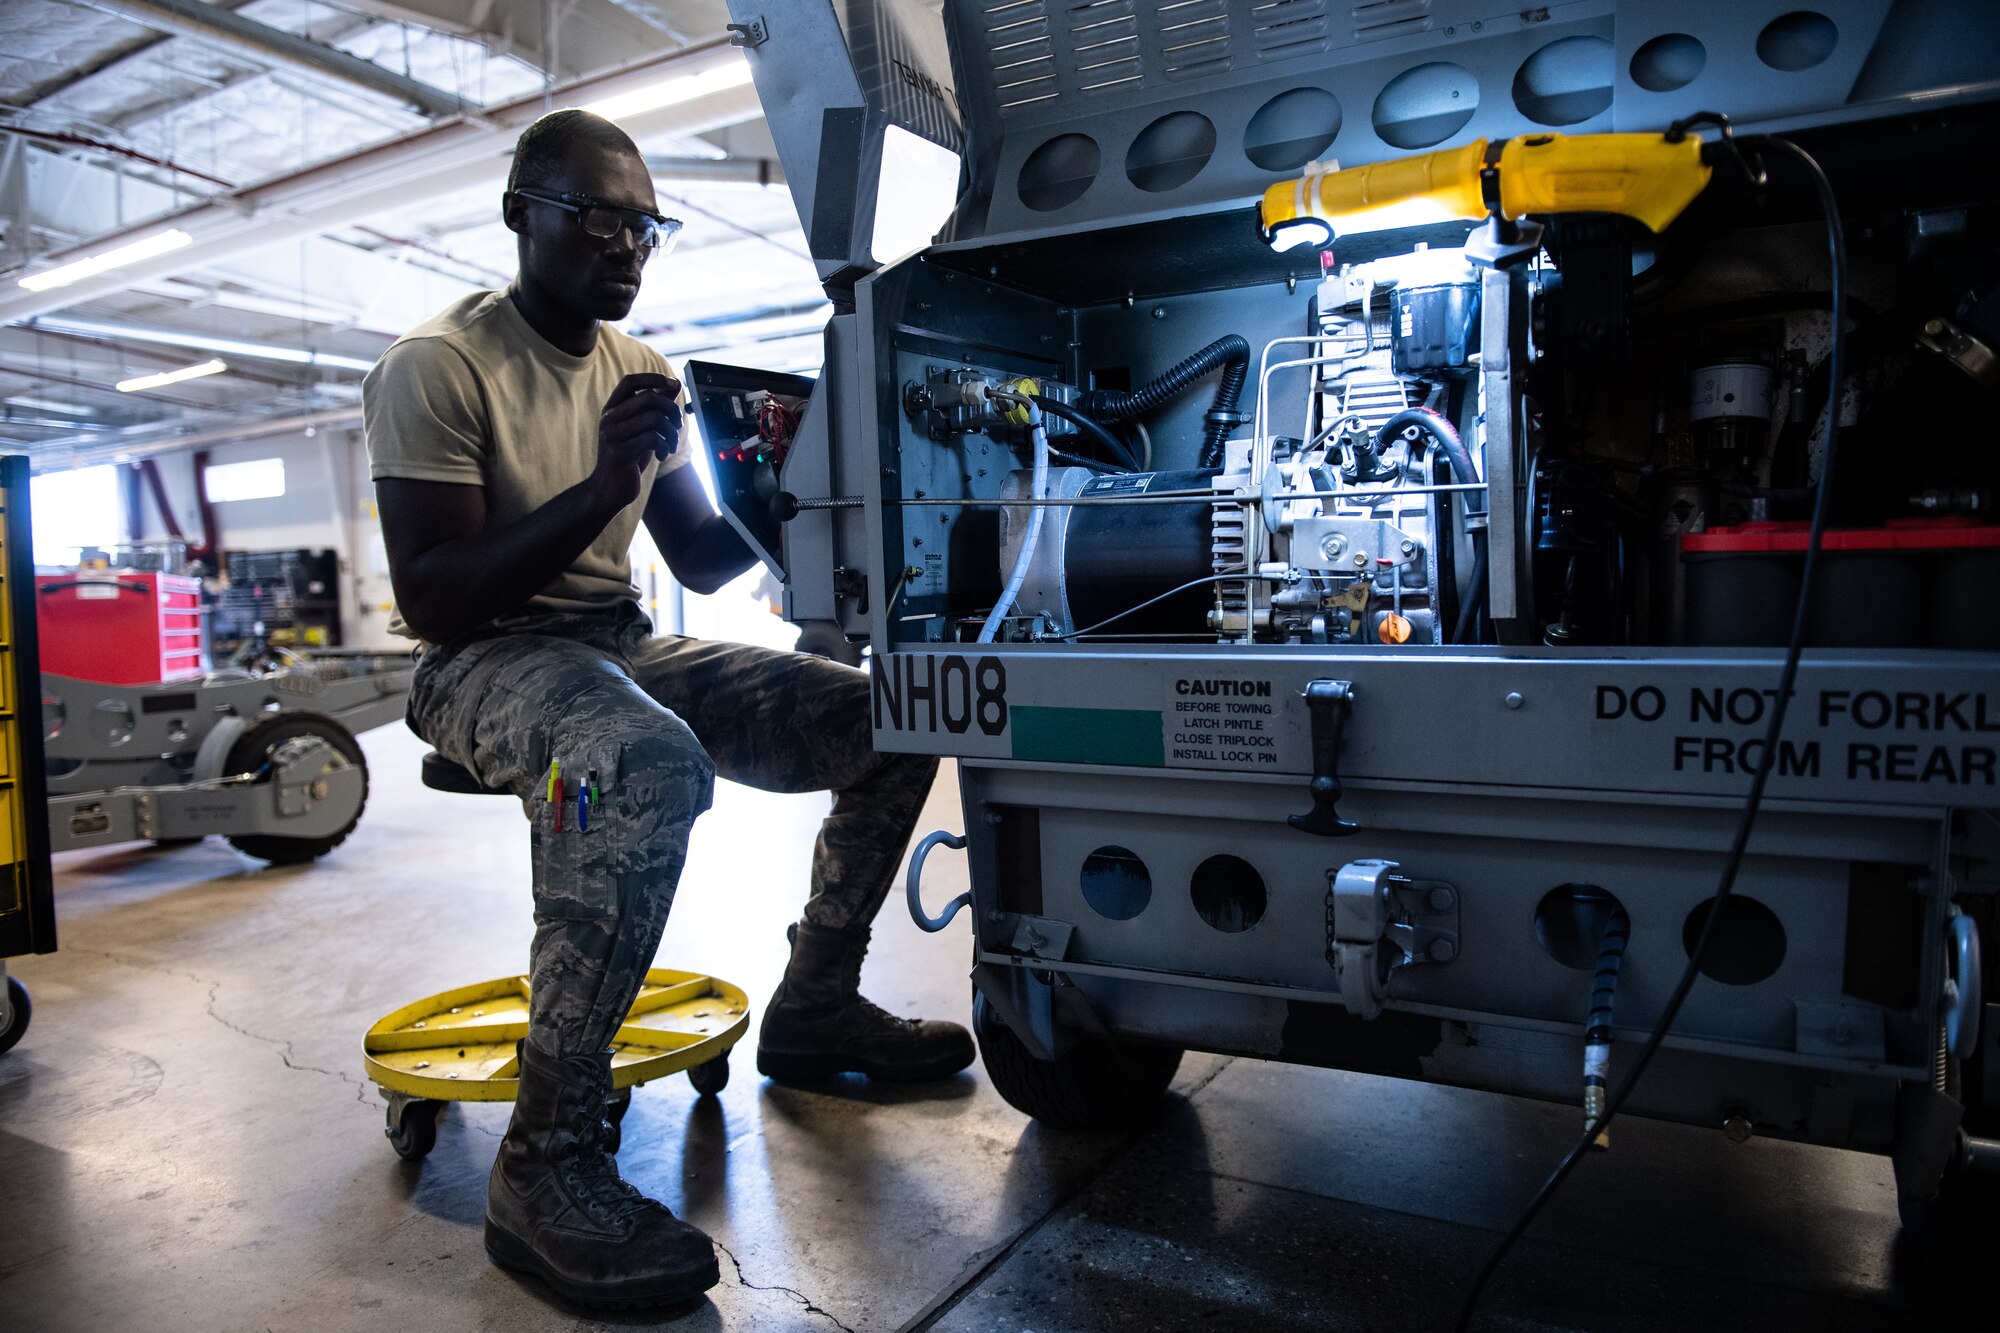 Airman 1st Class Michael Appiah, 388th Aerospace Ground Equipment Flight, performs maintenance on a mobile heater at Hill Air Force Base, Utah, Oct. 4, 2019. Unit Airmen maintain over 600 pieces of equipment that support the mission of crew chiefs, avionics, weapons and ammo troops. (U.S. Air Force photo by R. Nial Bradshaw)